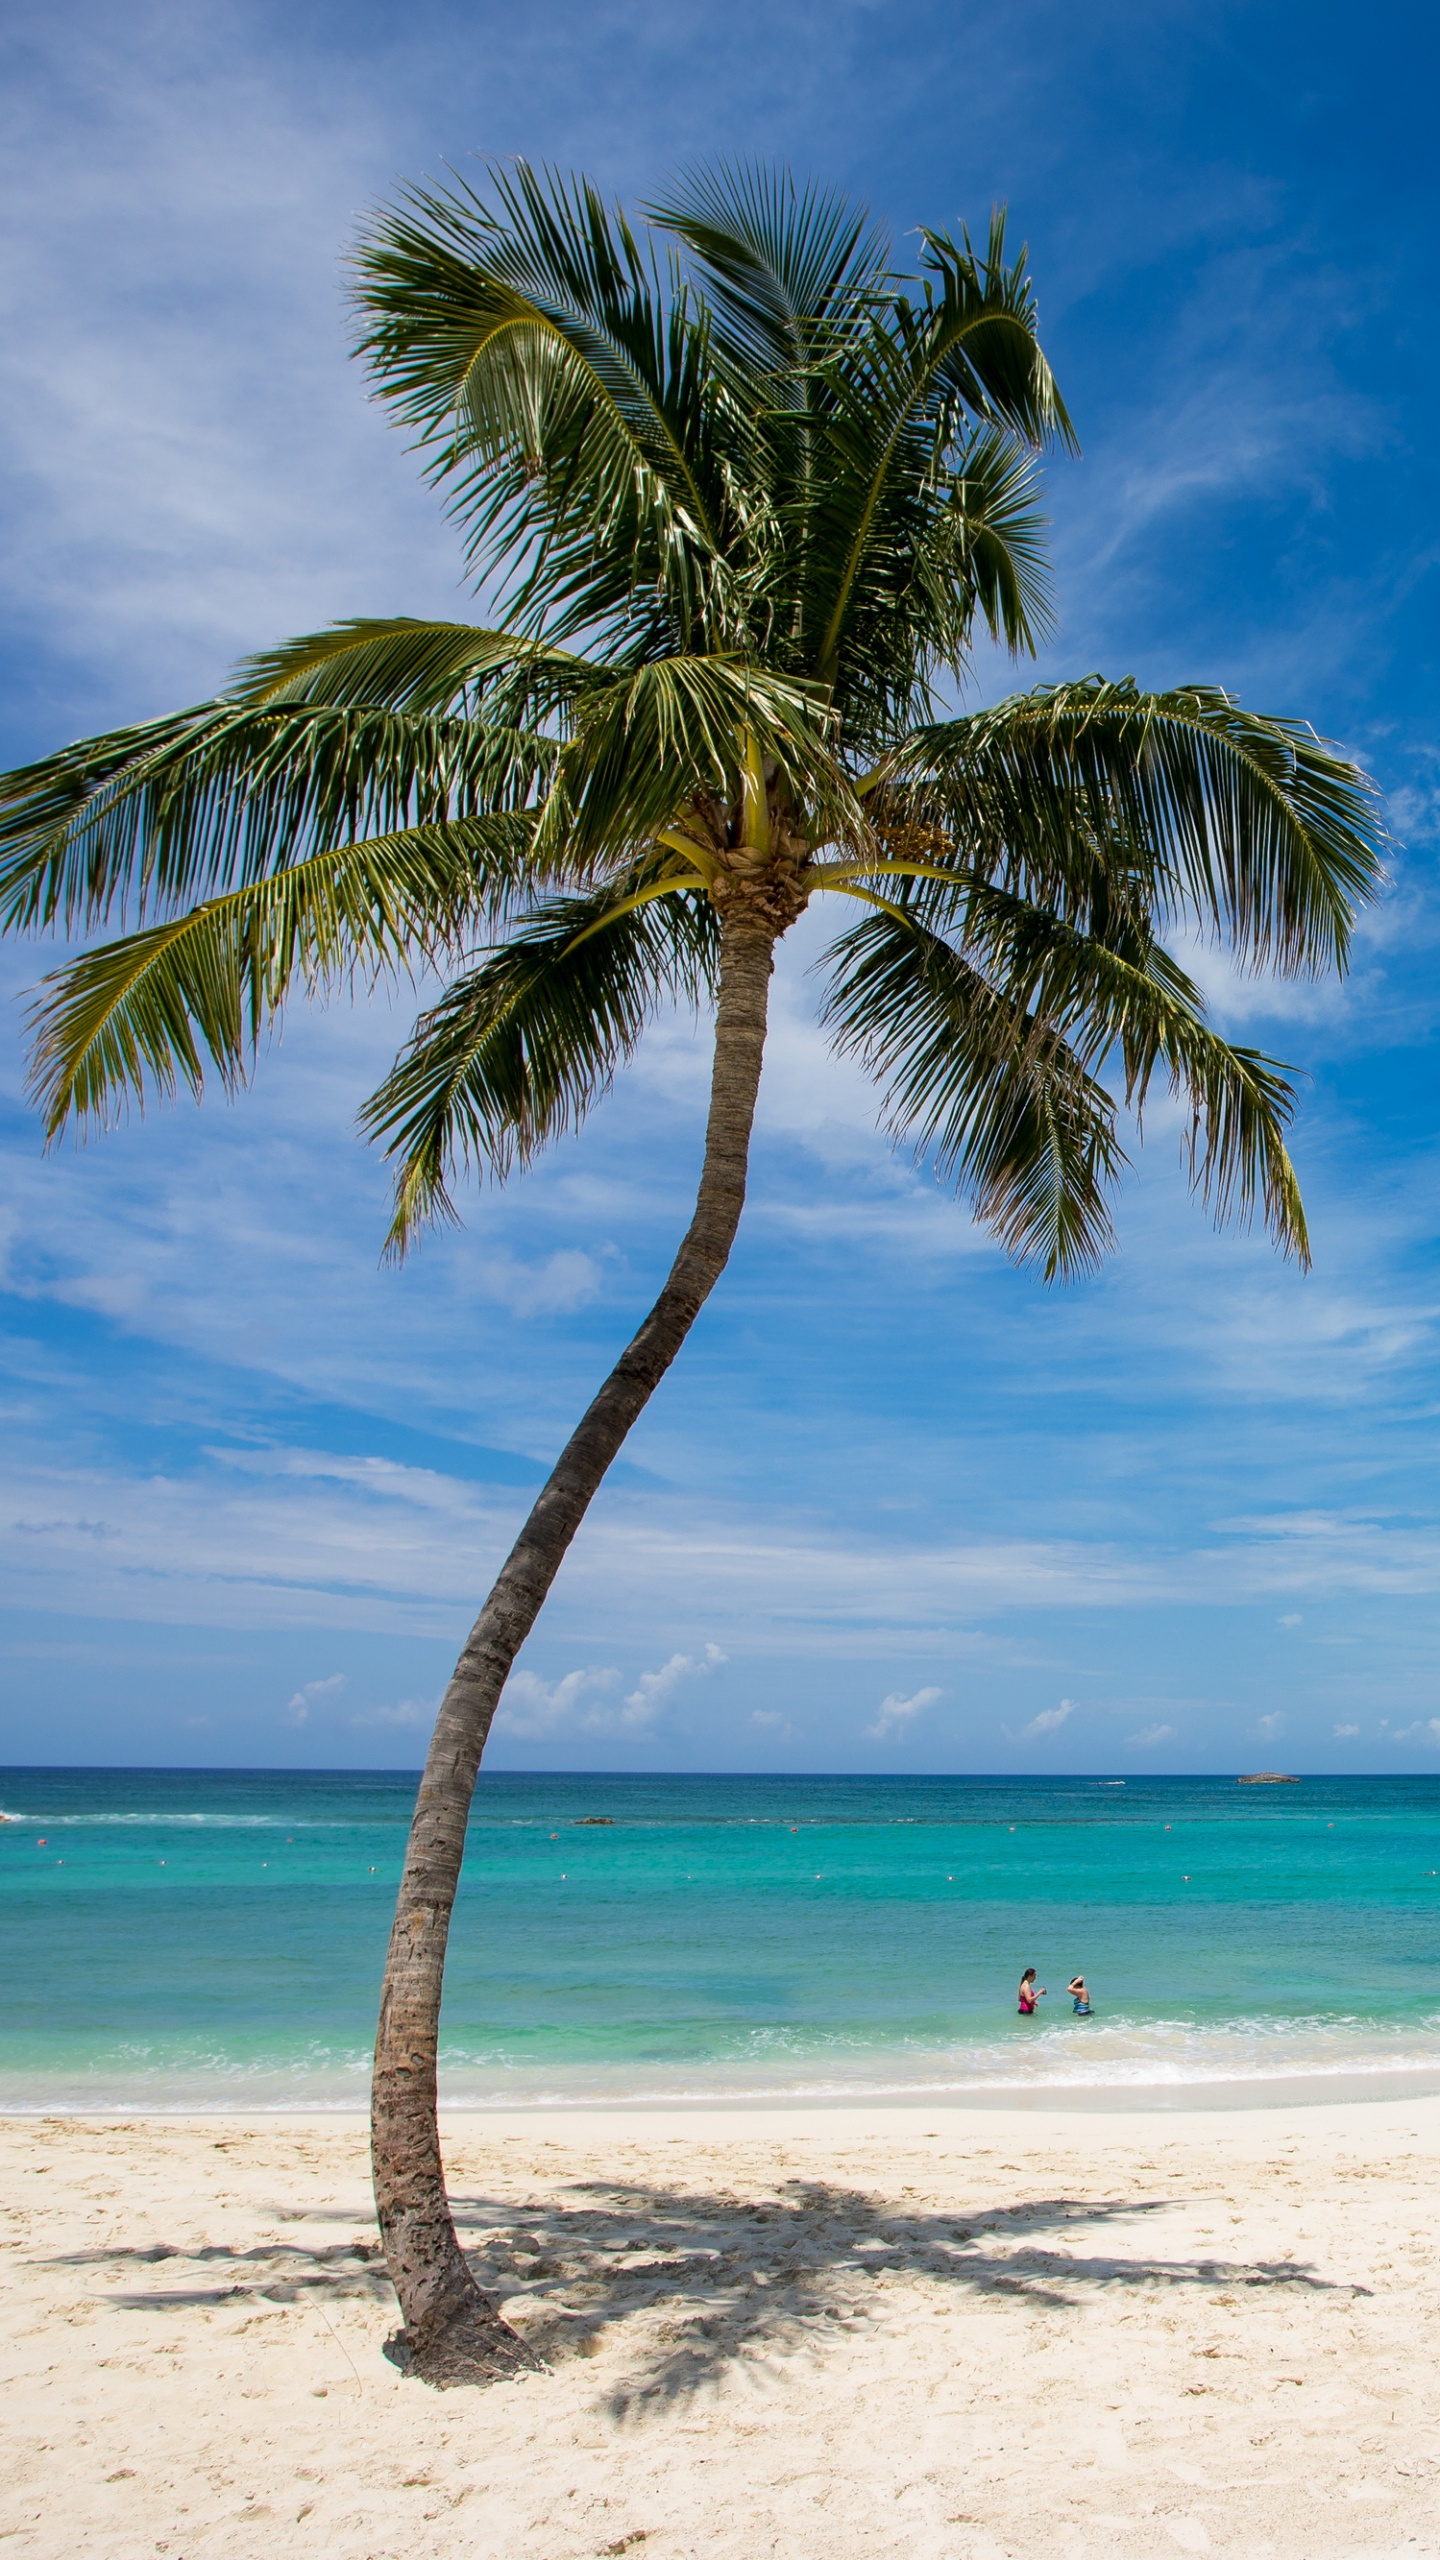 Palm Tree on Beach Shore During Daytime. Wallpaper in 1440x2560 Resolution